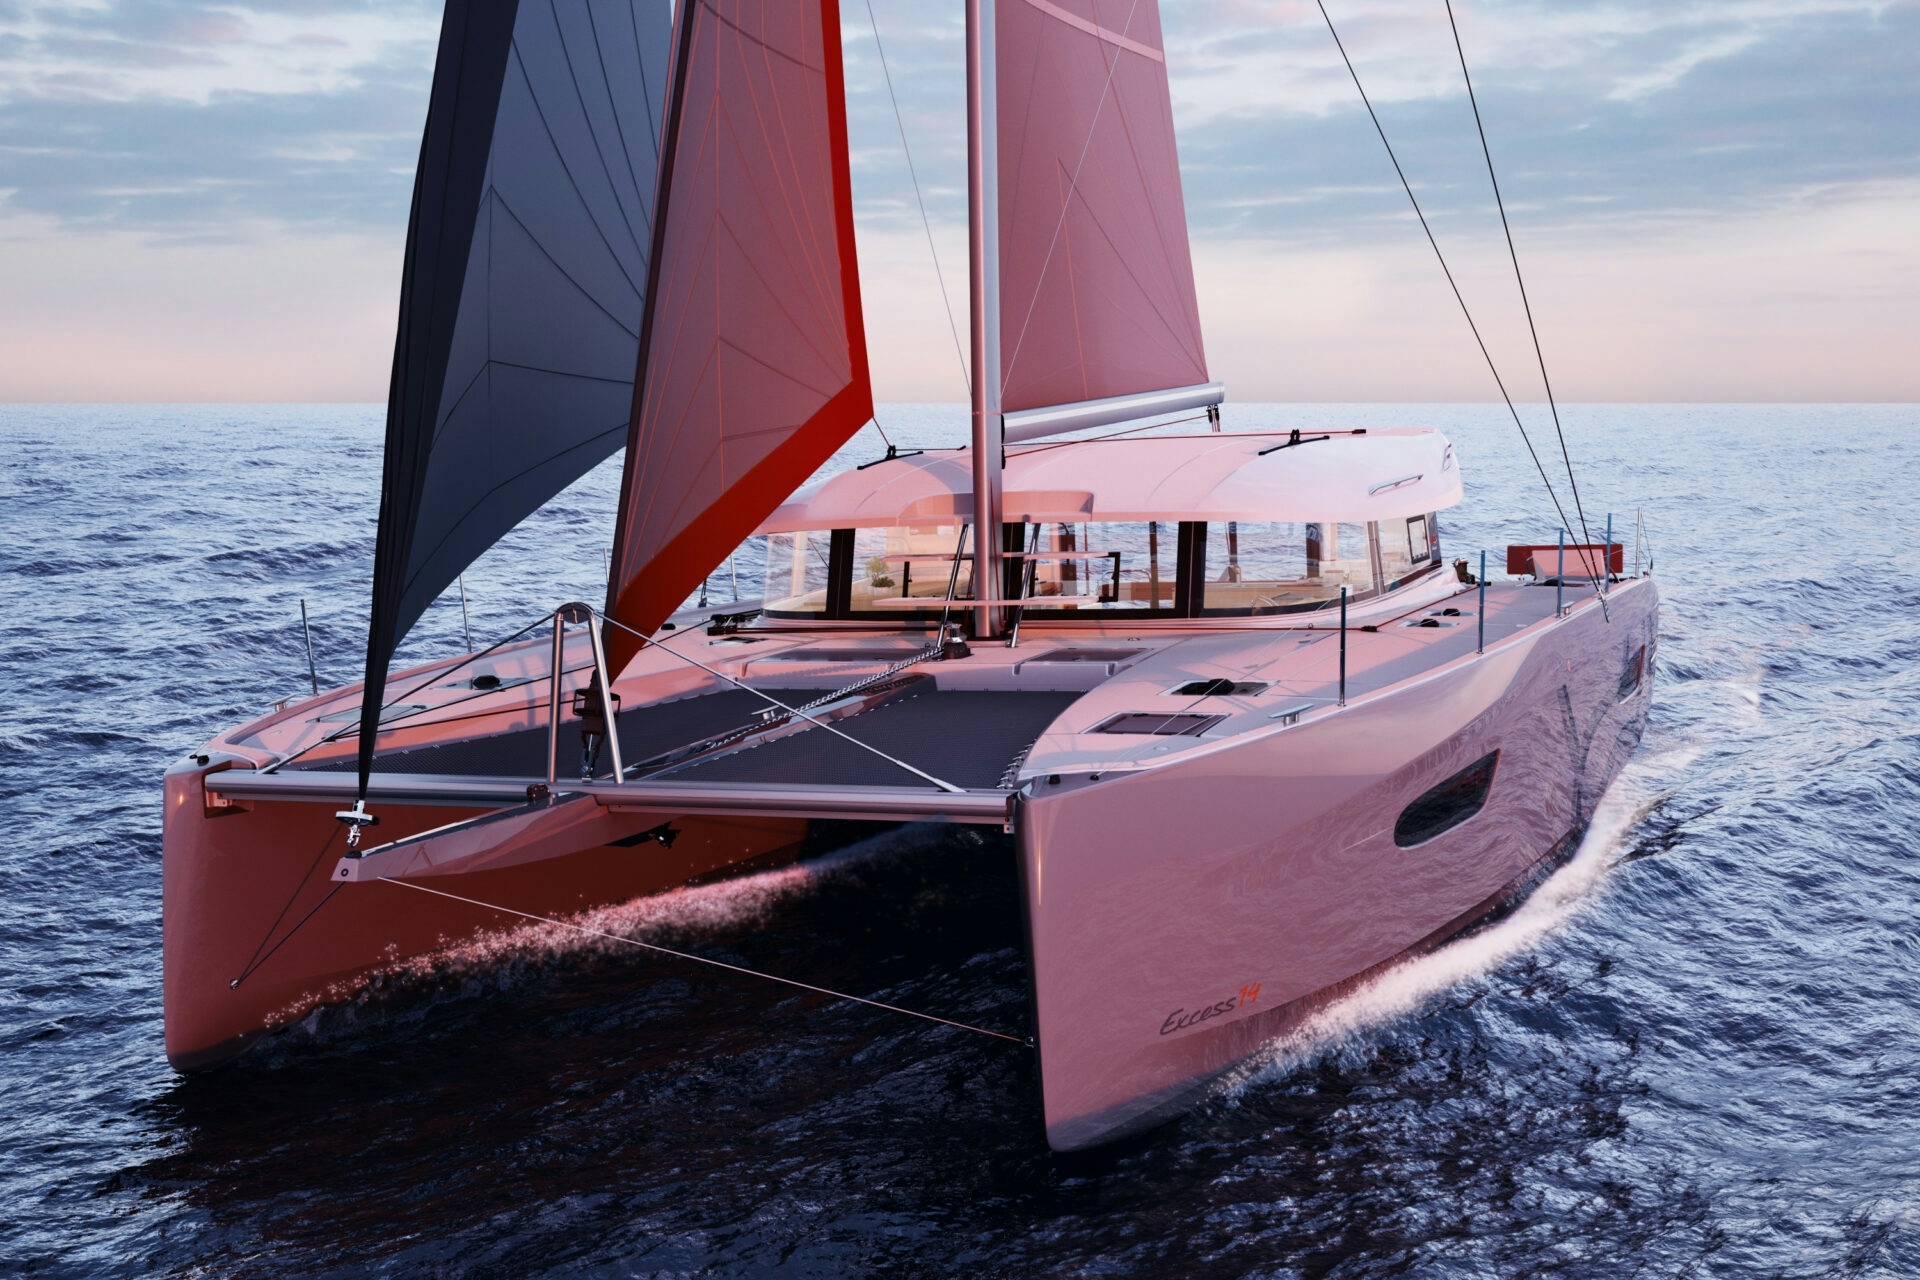 the Excess catamaran could be the right new boat for you